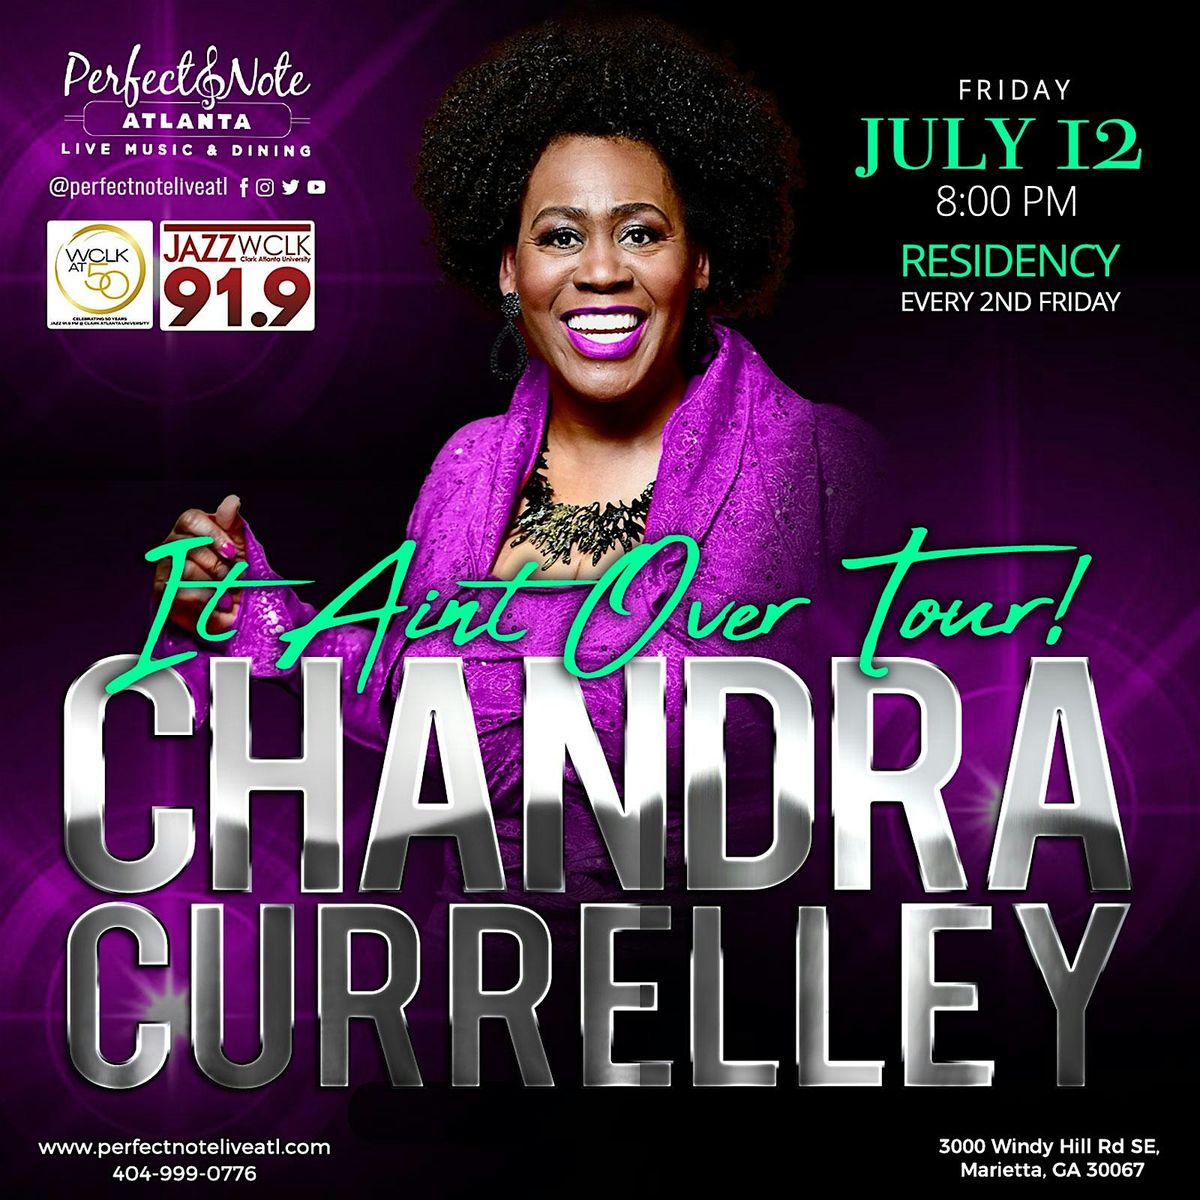 Actress and Legendary Singer Chandra Currelley from Tyler Perry's Plays and TV shows